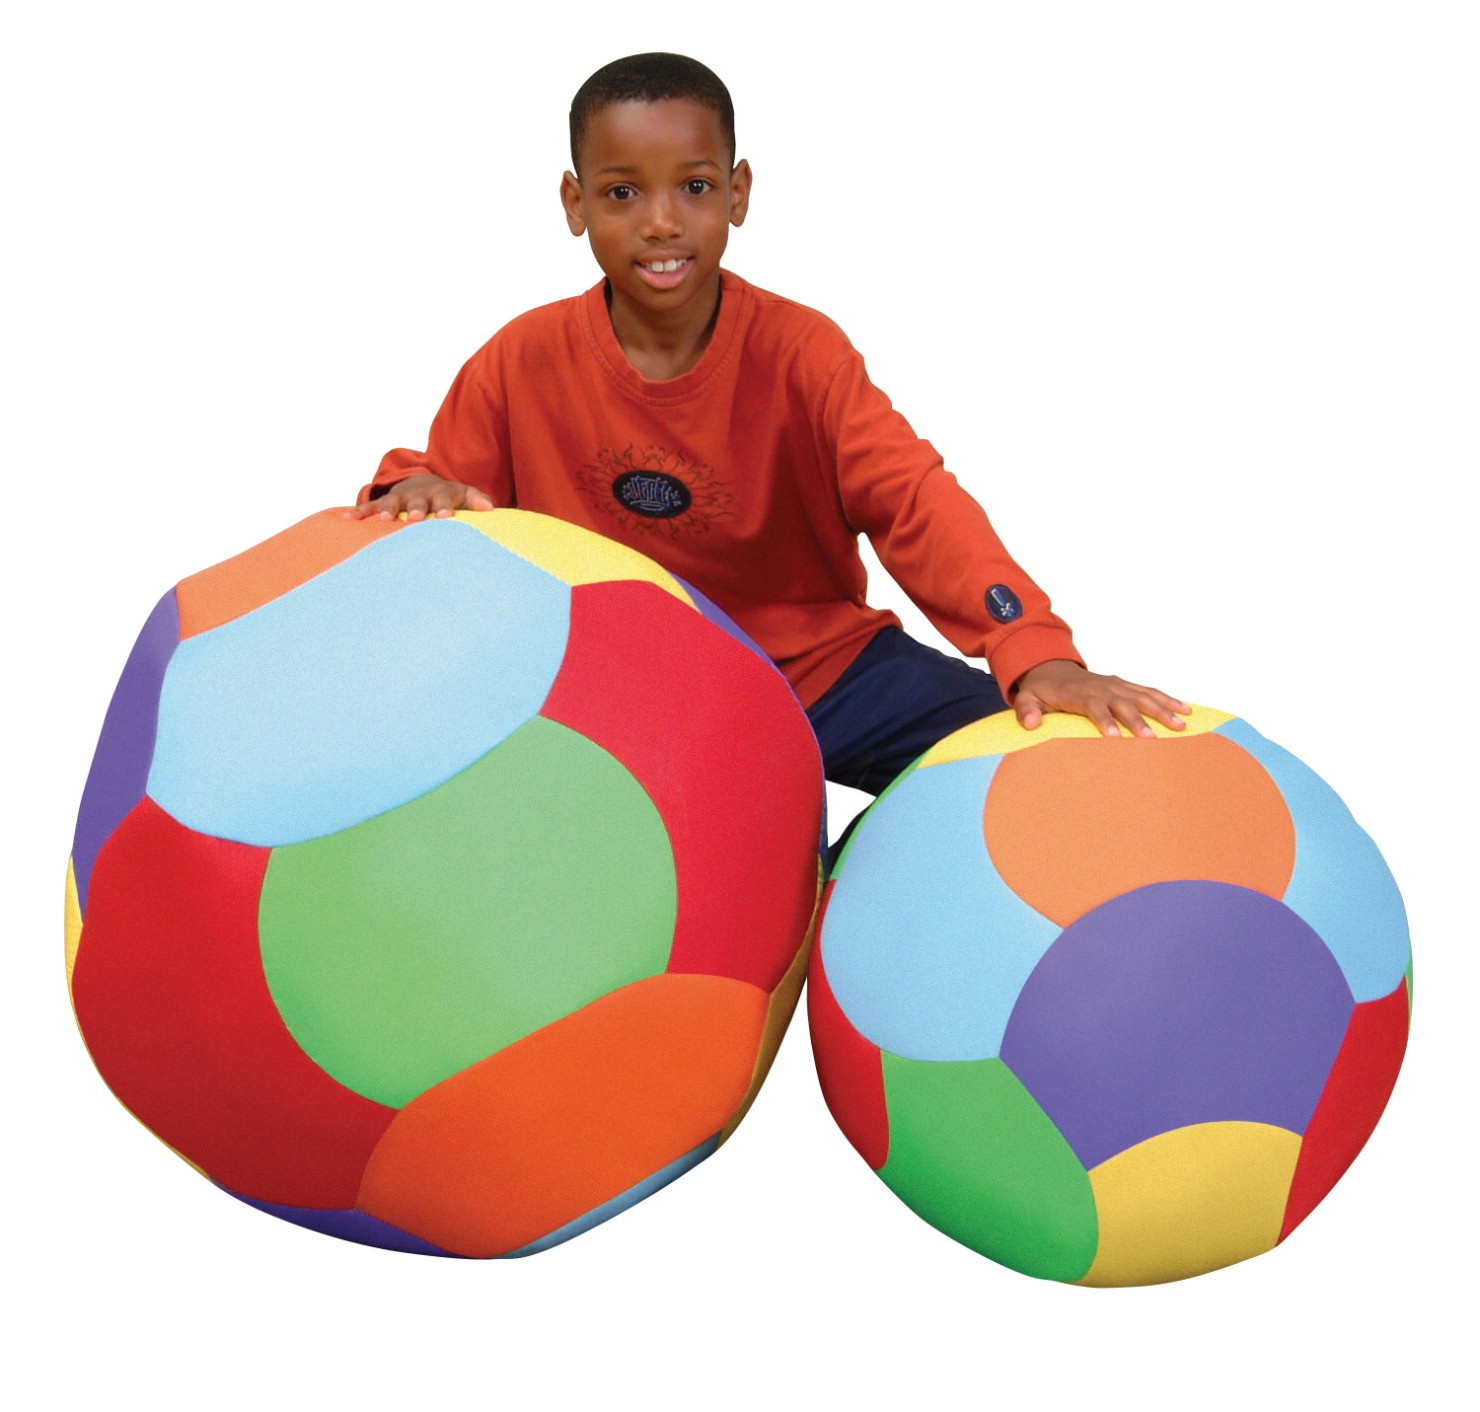 18" Giant NyLyte Ball, Fabric Covered